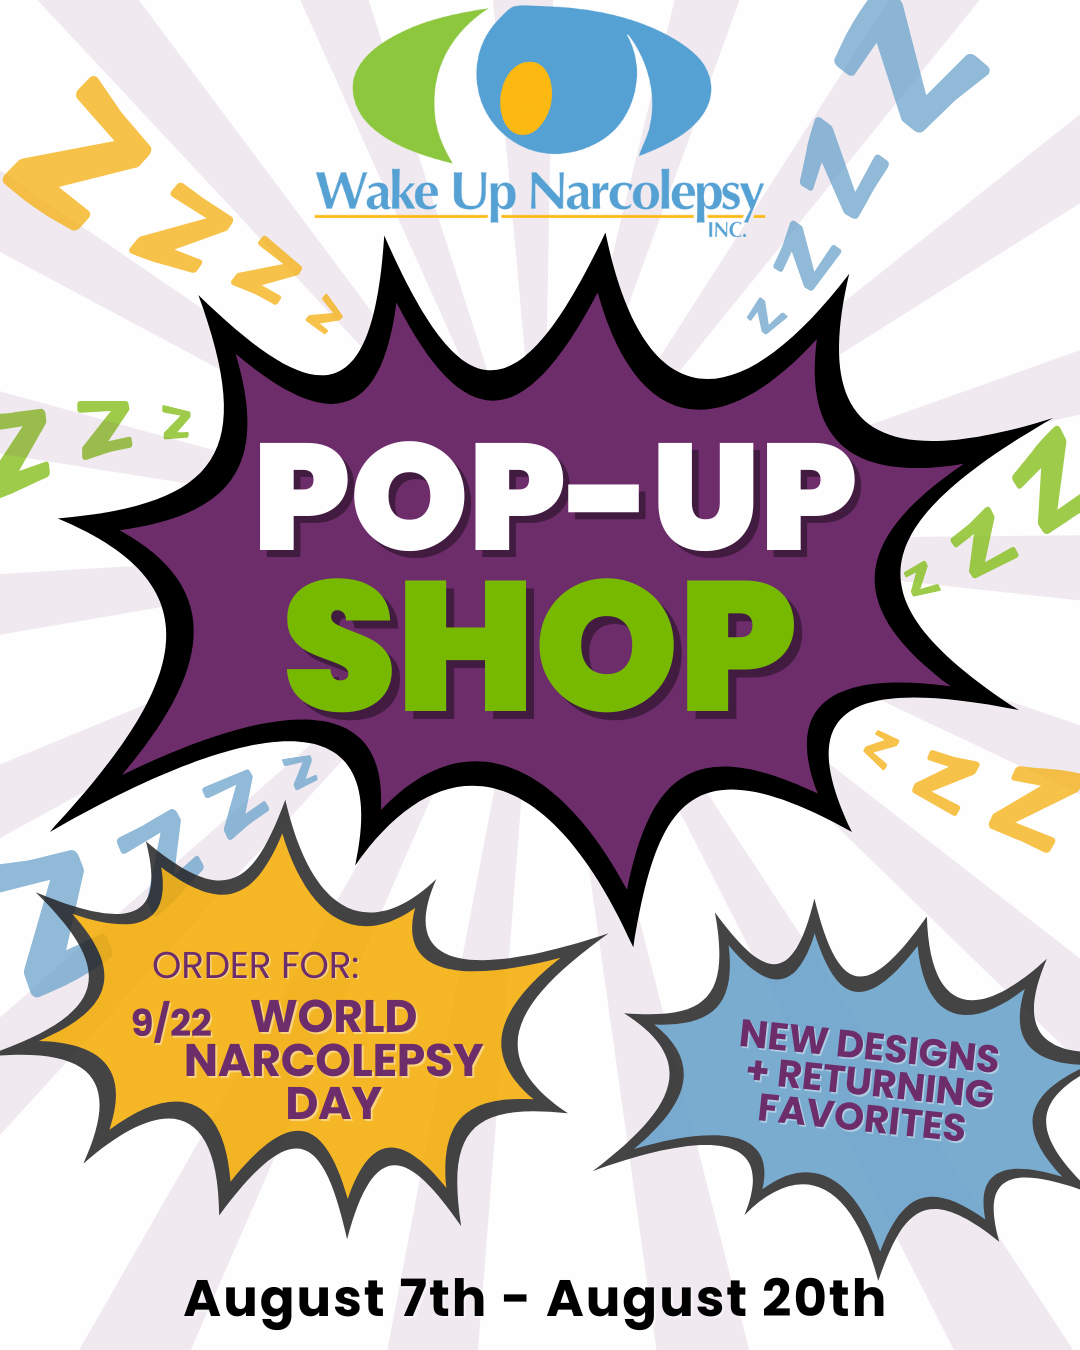 Wake Up Narcolepsy Pop-Up Shop. Order for 9/22 World Narcolepsy Day - New Designs and returning favorites - August 7th-August20th